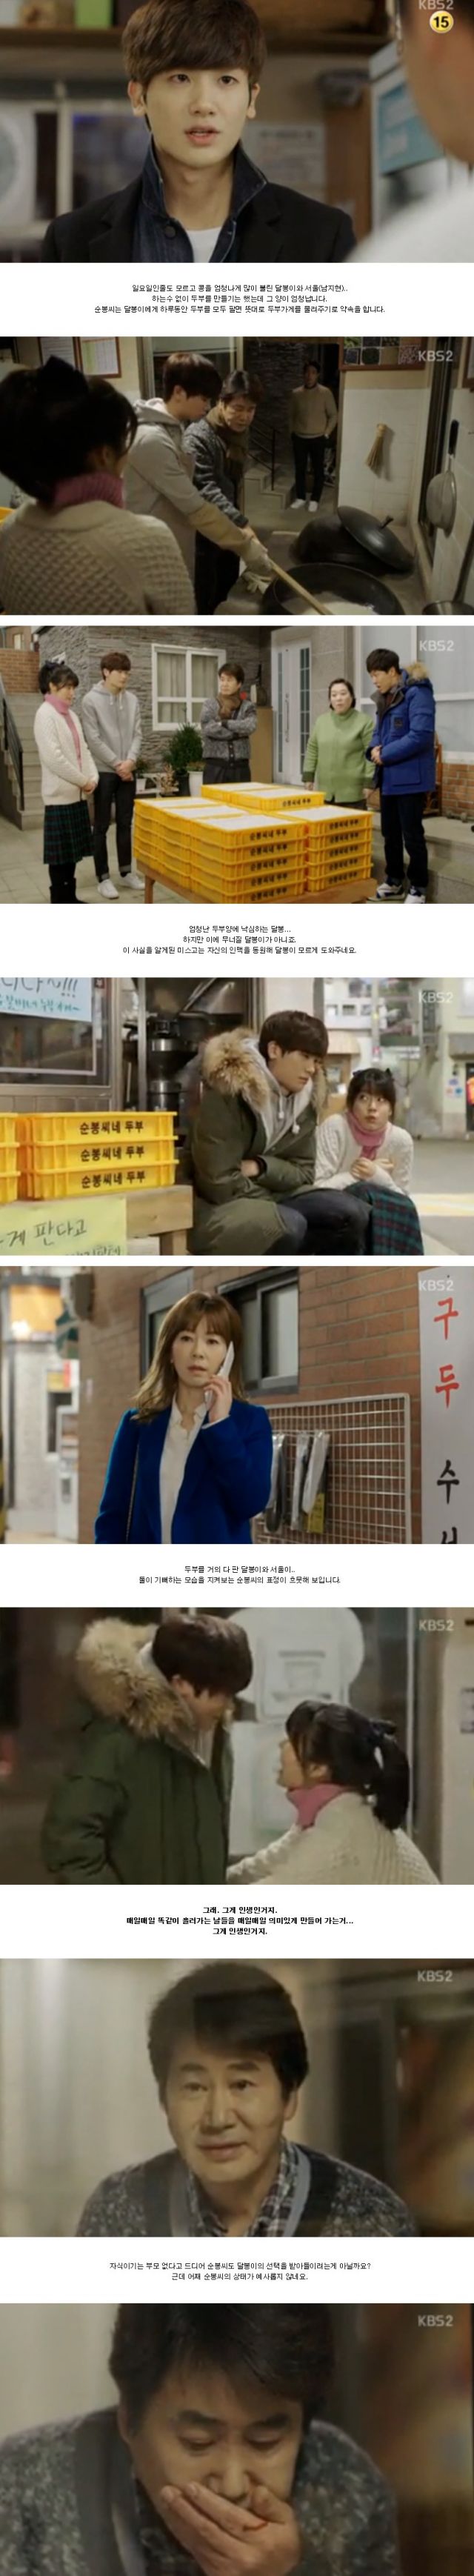 episodes 42 and 43 captures for the Korean drama 'This Is Family'